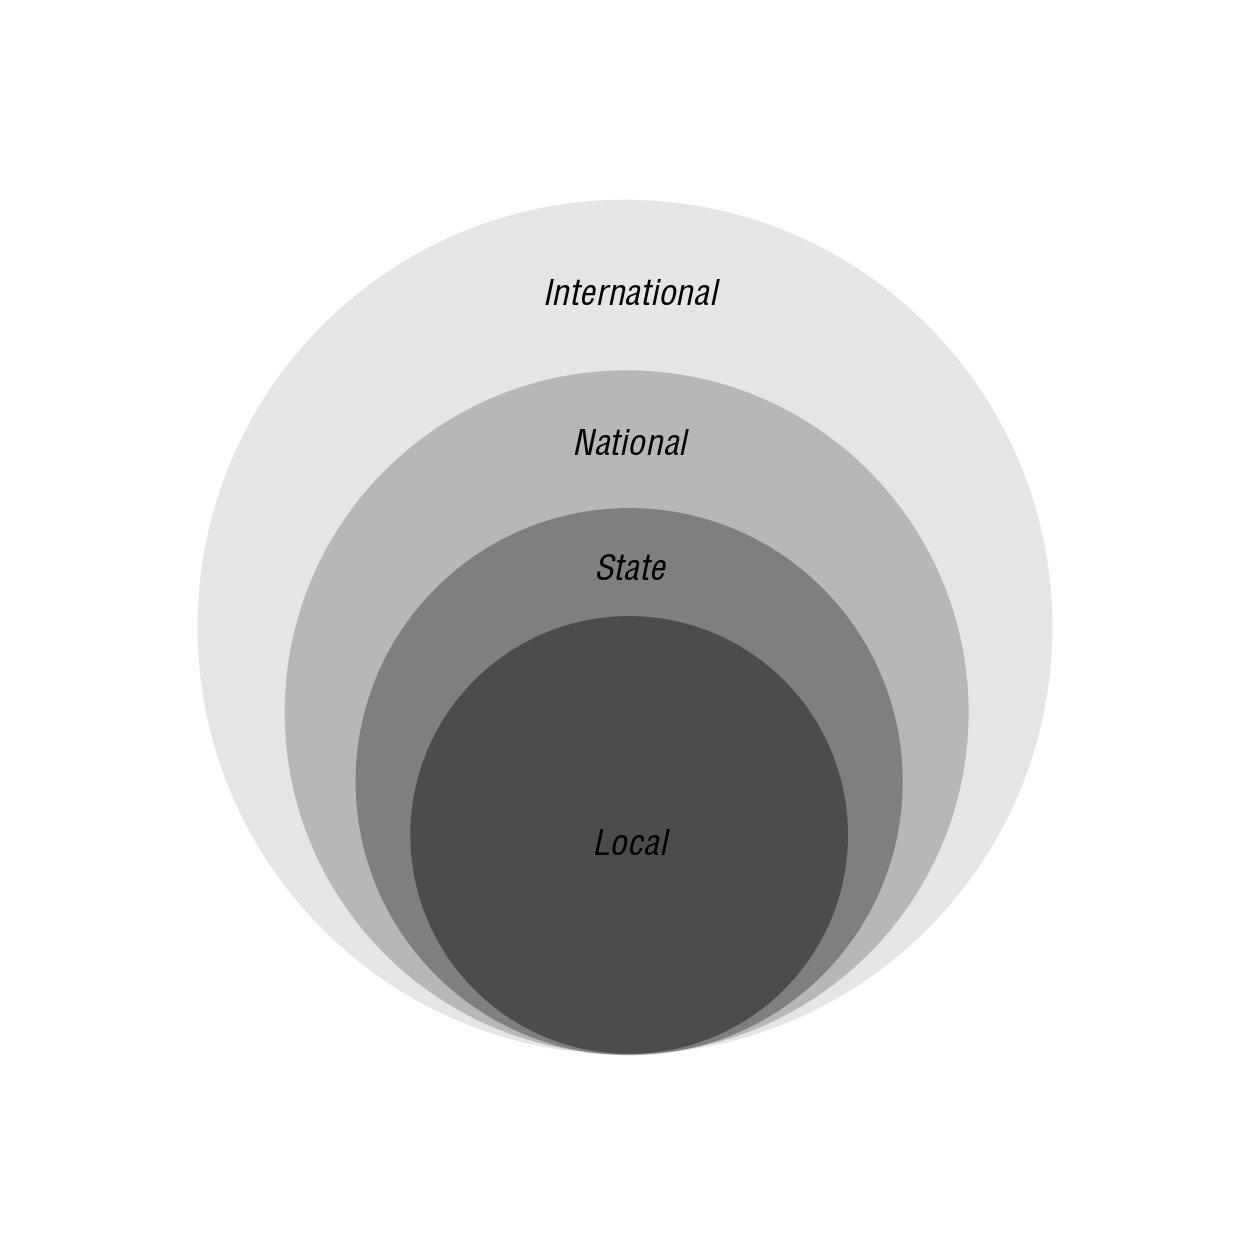 Circular diagram showing international, national, state and local scales.